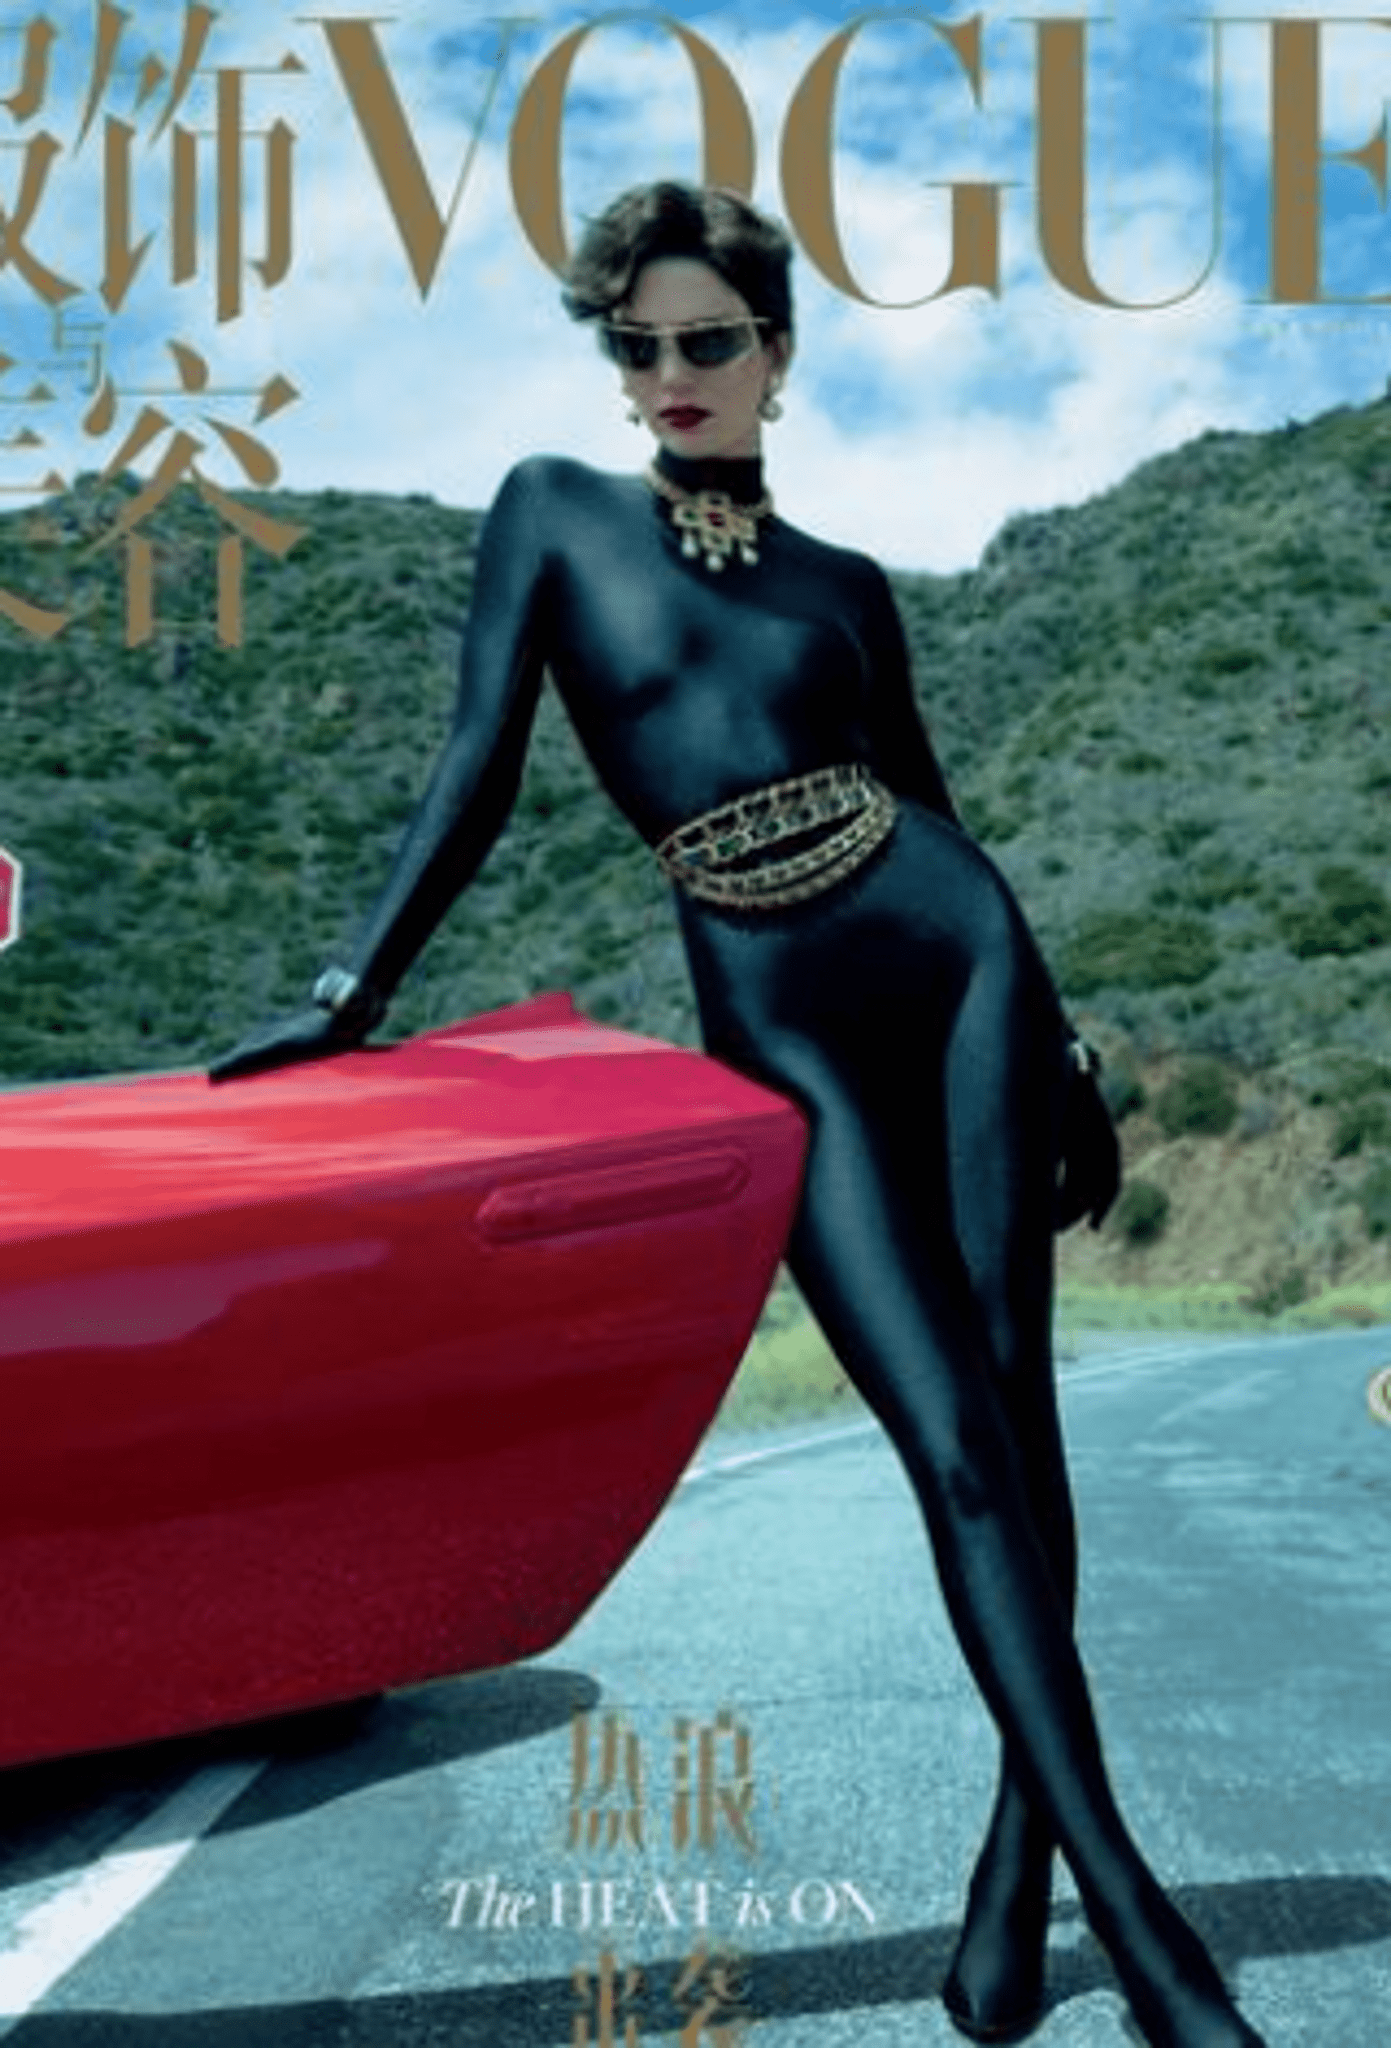 Kendall Jenner, in a catsuit, appeared on the cover of Chinese Vogue